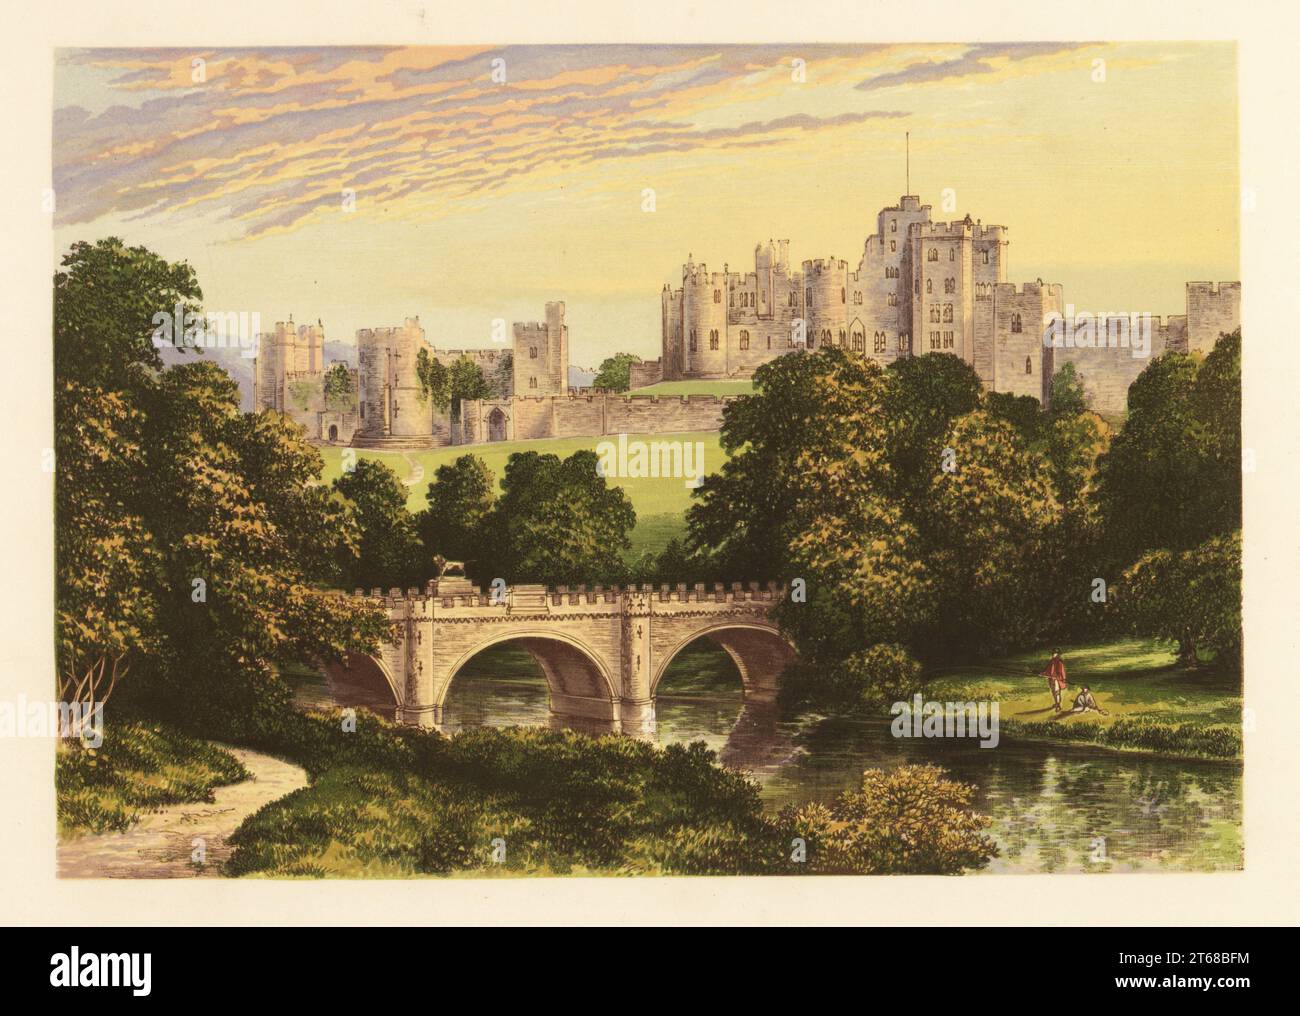 Alnwick Castle, bridge and moat, Northumberland, England. Norman castle built in 1096, renovated in the 18th century by Robert Adam and James Paine with landscaped grounds by Capability Brown, and again in the 19th century by Anthony Savin and Luigi Canina for Algernon Percy, 4th Duke of Northumberland. Colour woodblock by Benjamin Fawcett in the Baxter process of an illustration by Alexander Francis Lydon from Reverend Francis Orpen Morriss Picturesque Views of the Seats of Noblemen and Gentlemen of Great Britain and Ireland, William Mackenzie, London, 1880. Stock Photo